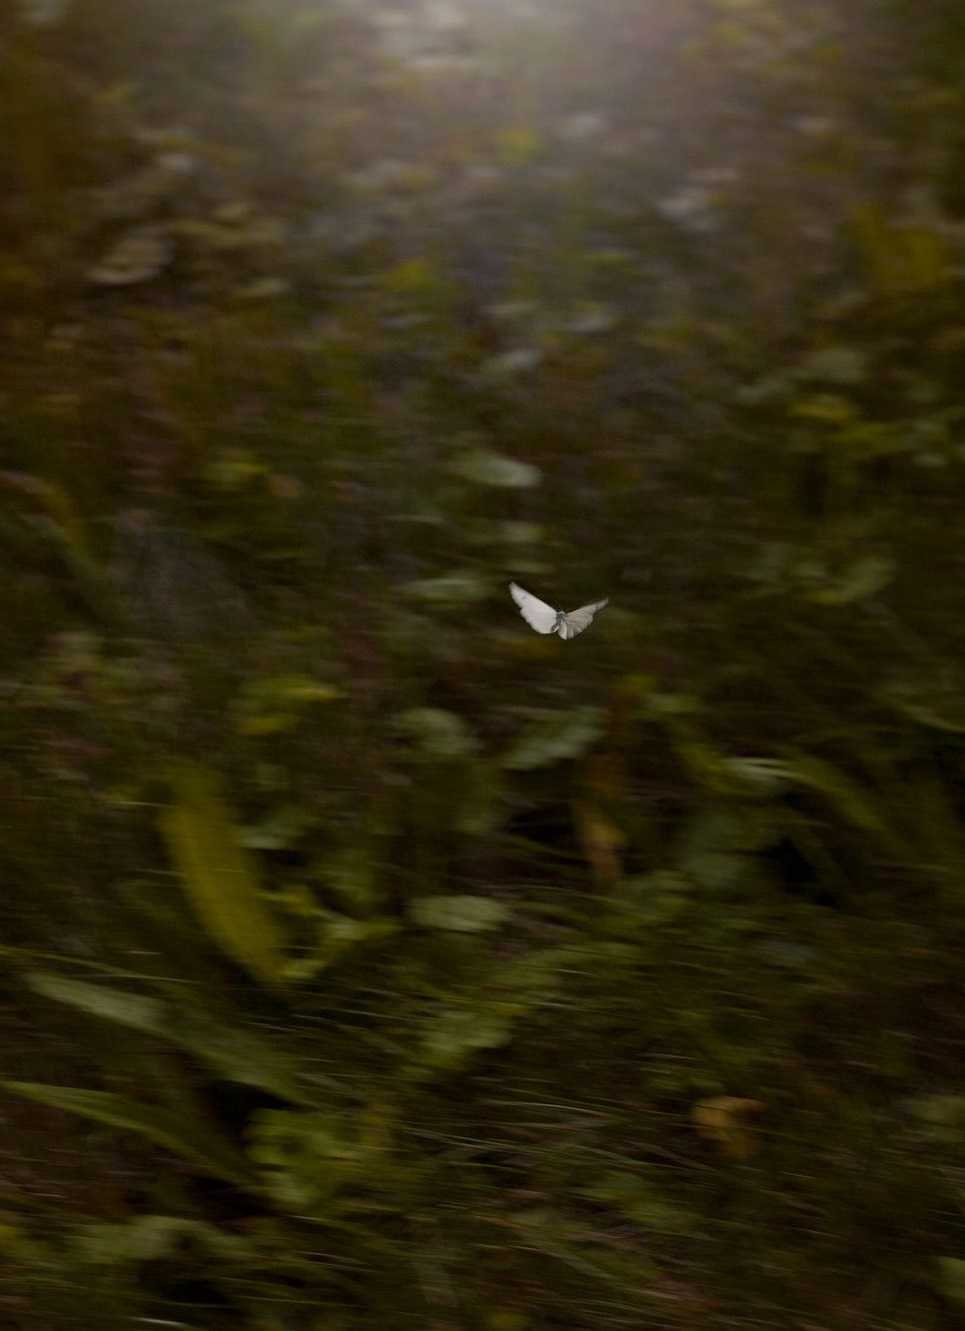 A butterfly flying over the grass in an open field - Grunge, forest